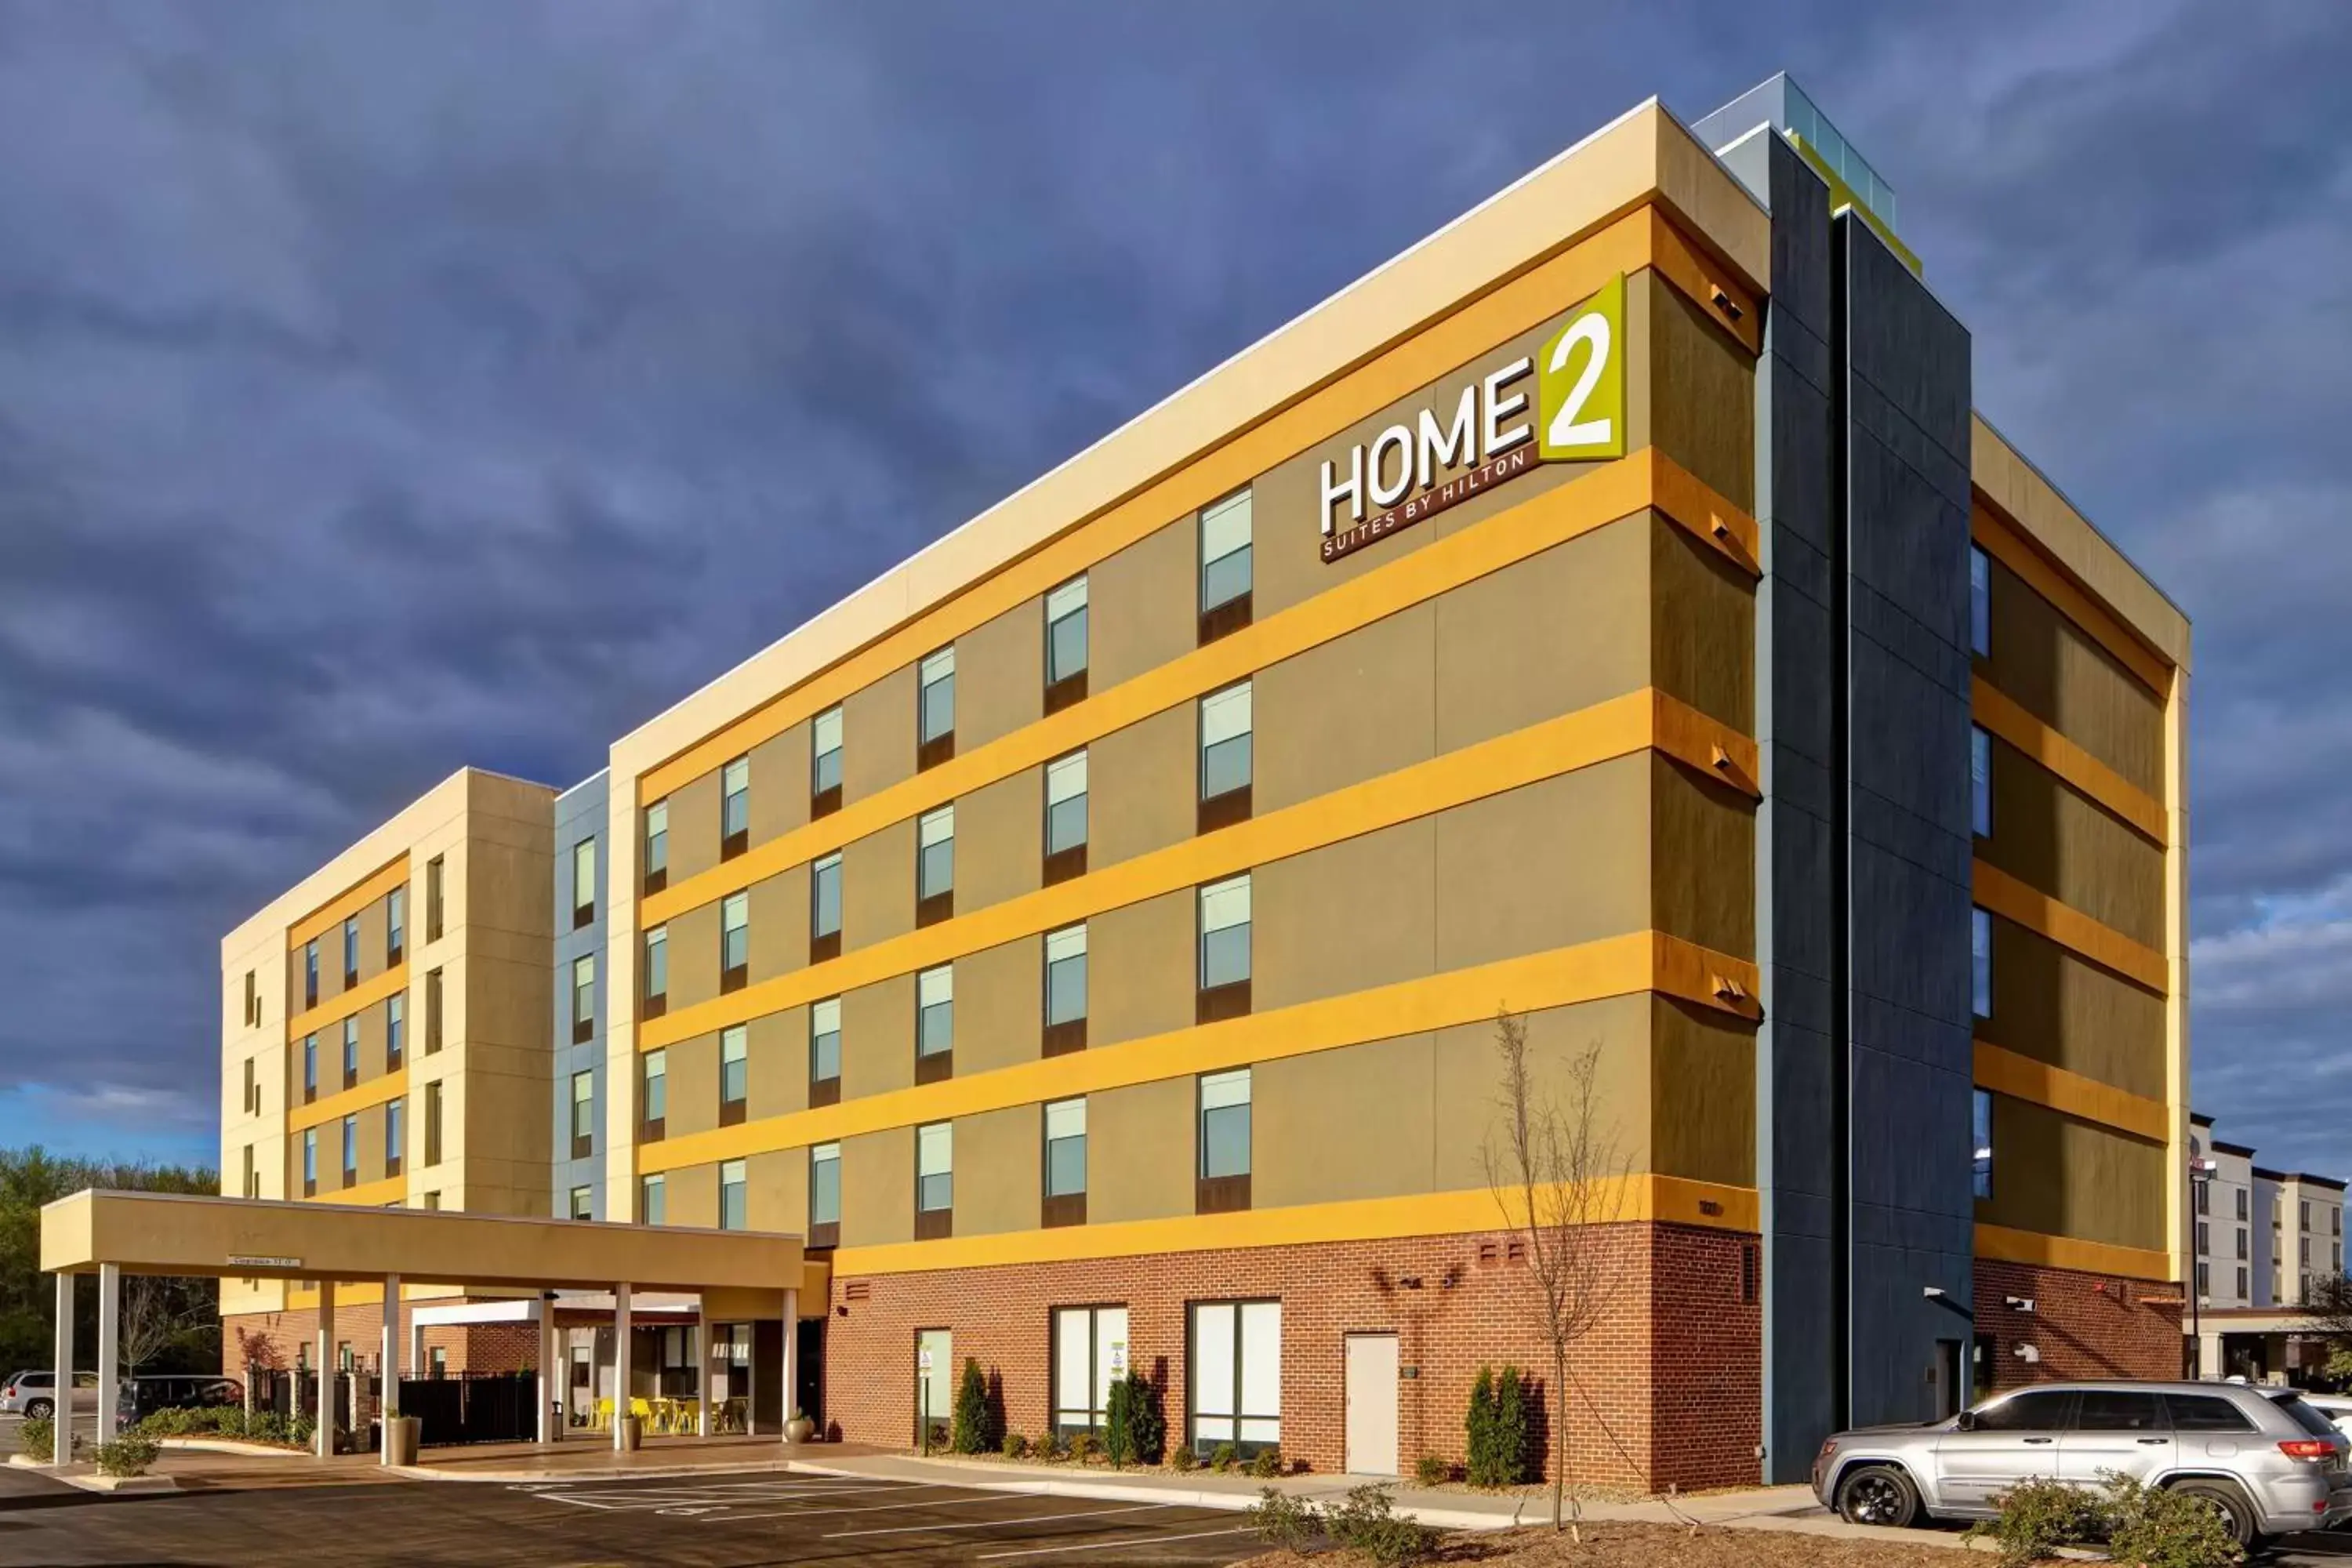 Property Building in Home2 Suites By Hilton Charlotte Northlake